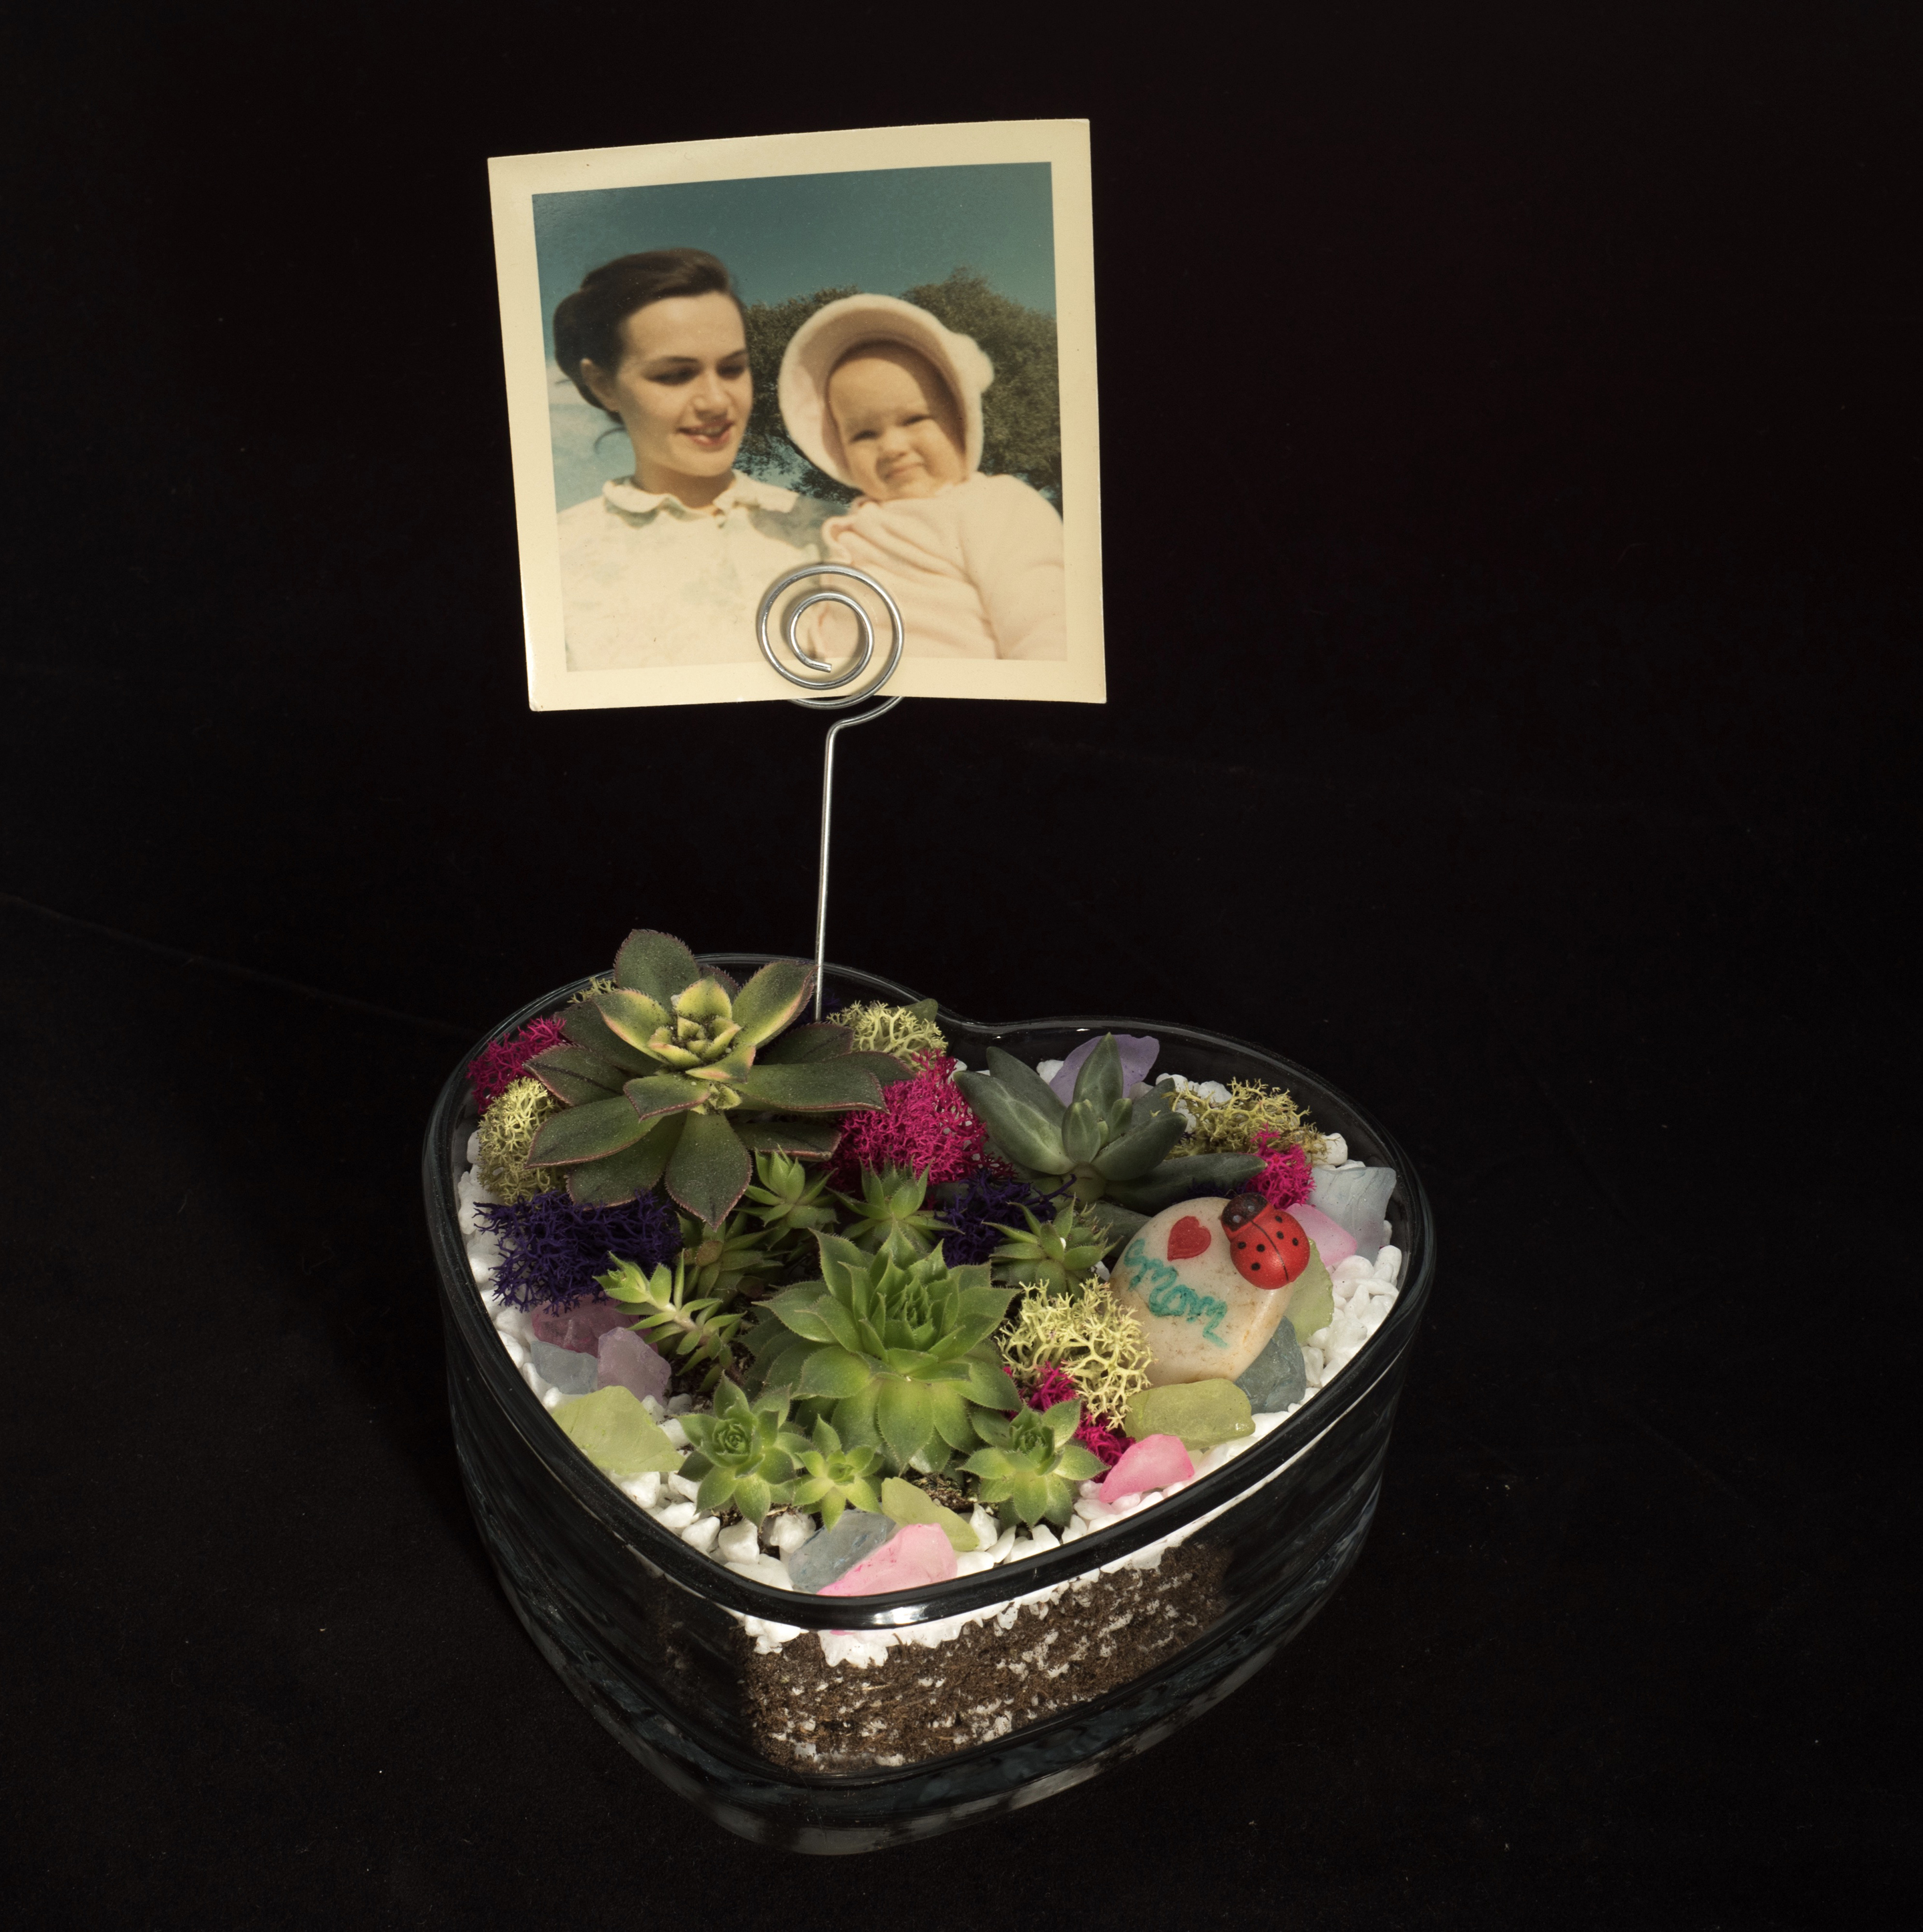 A Mothers Day Glass Heart Planter w Photo plant nite project by Yaymaker